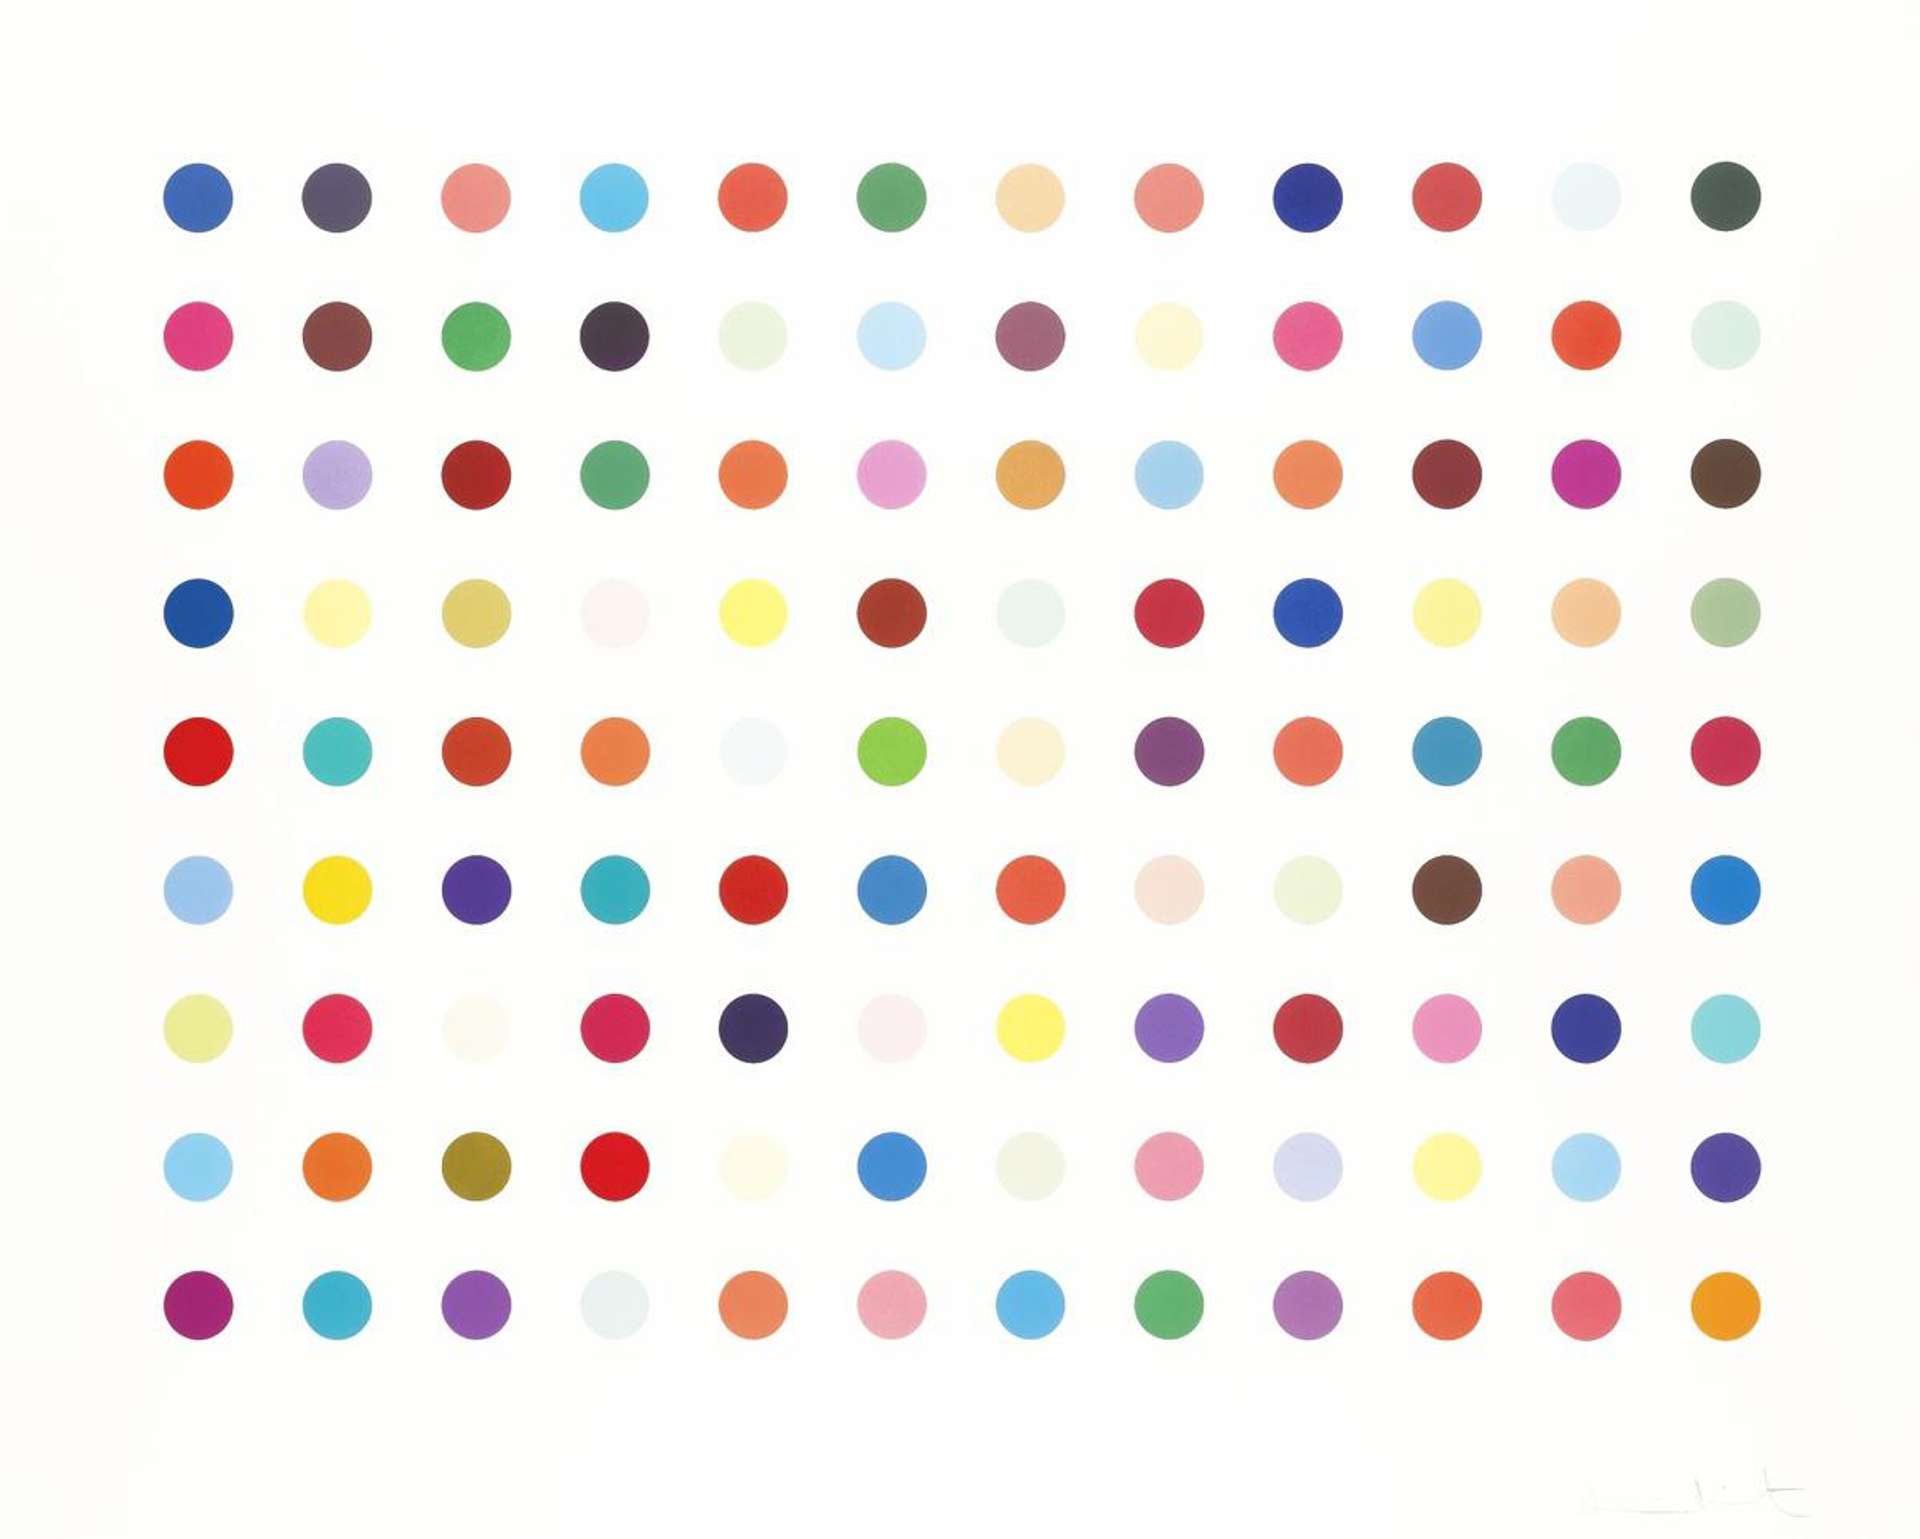  An artwork by Damien Hirst displaying a grid of evenly spaced multicoloured dots arranged in columns and rows.